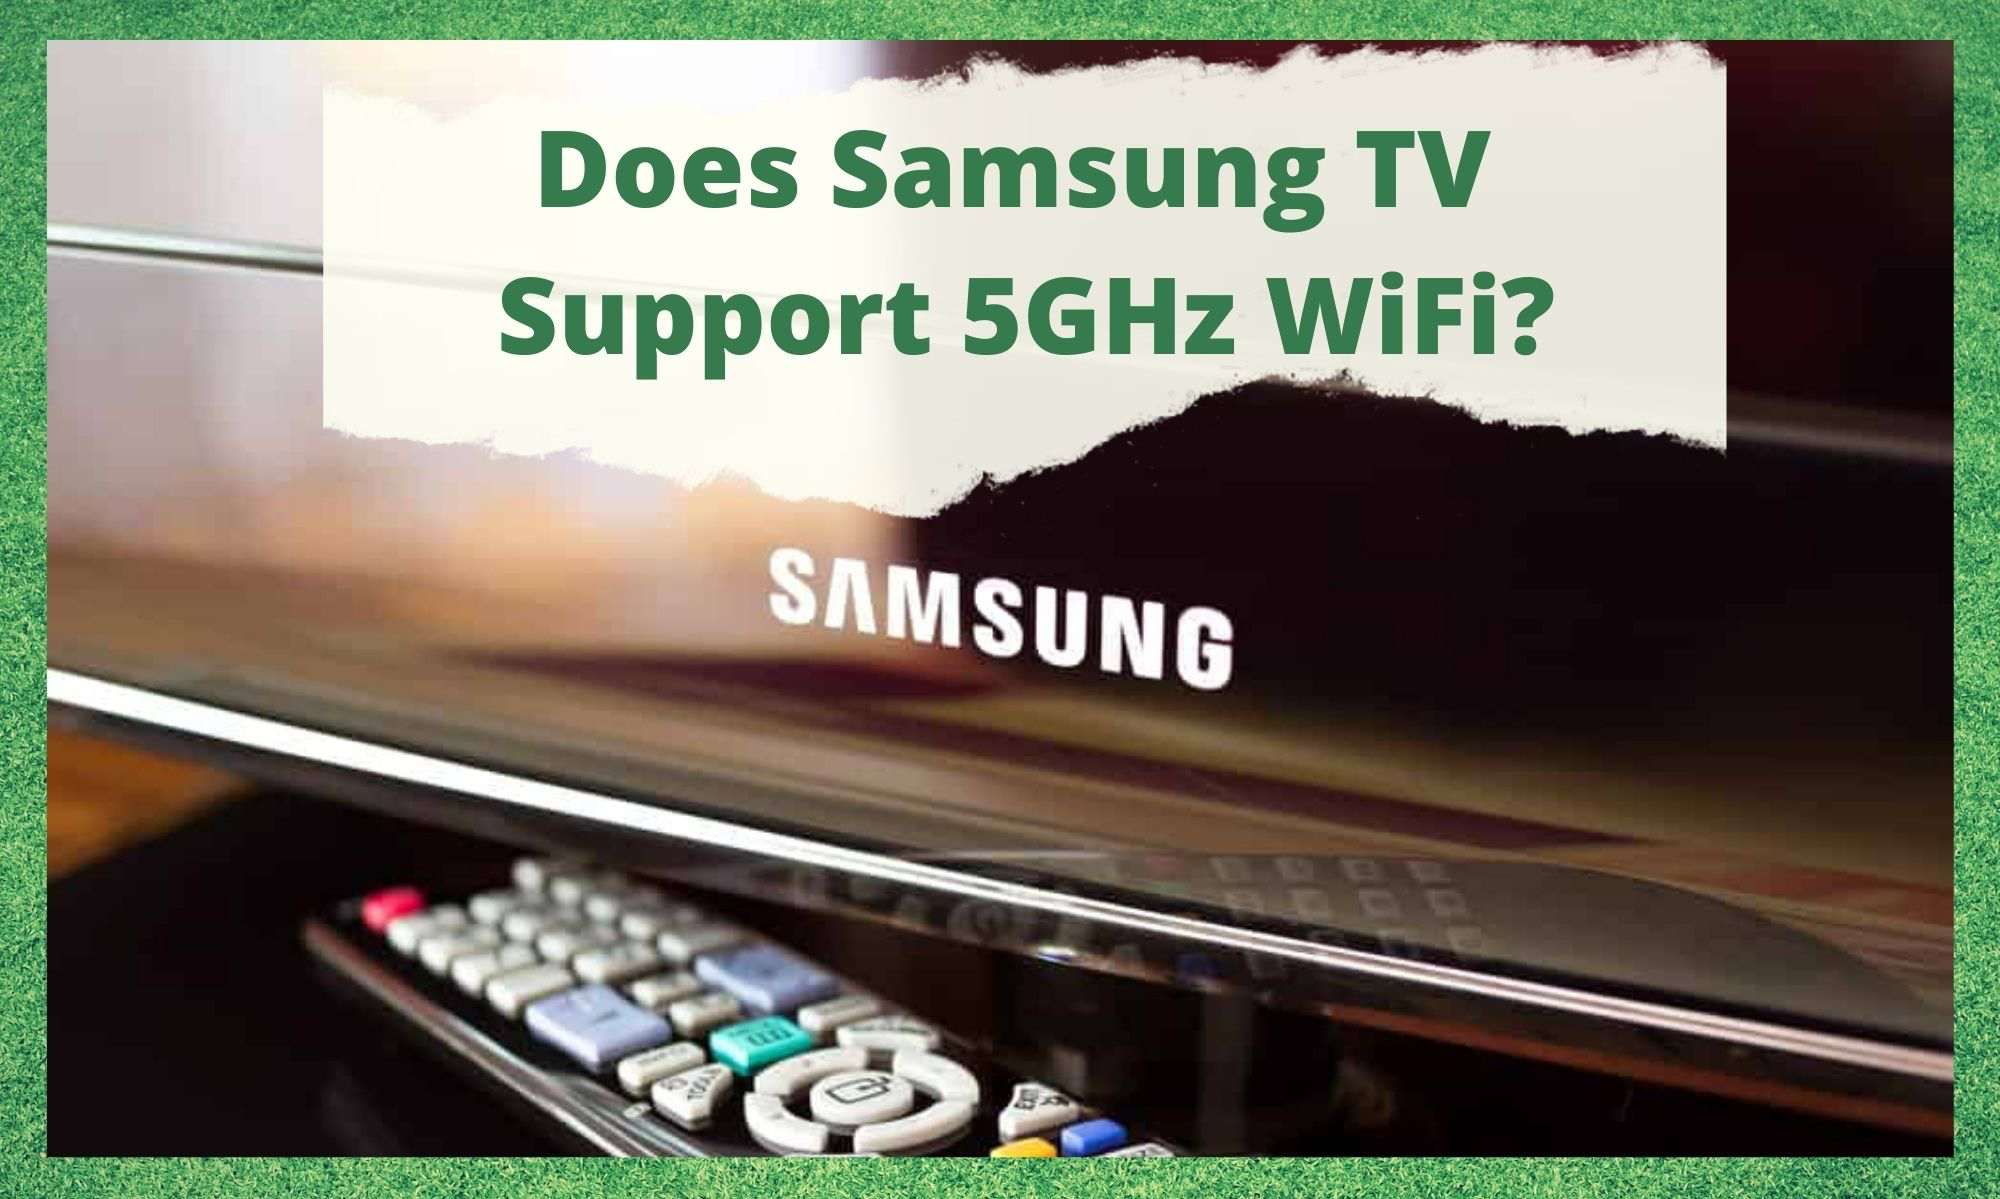 Does Samsung TV Support 5GHz WiFi